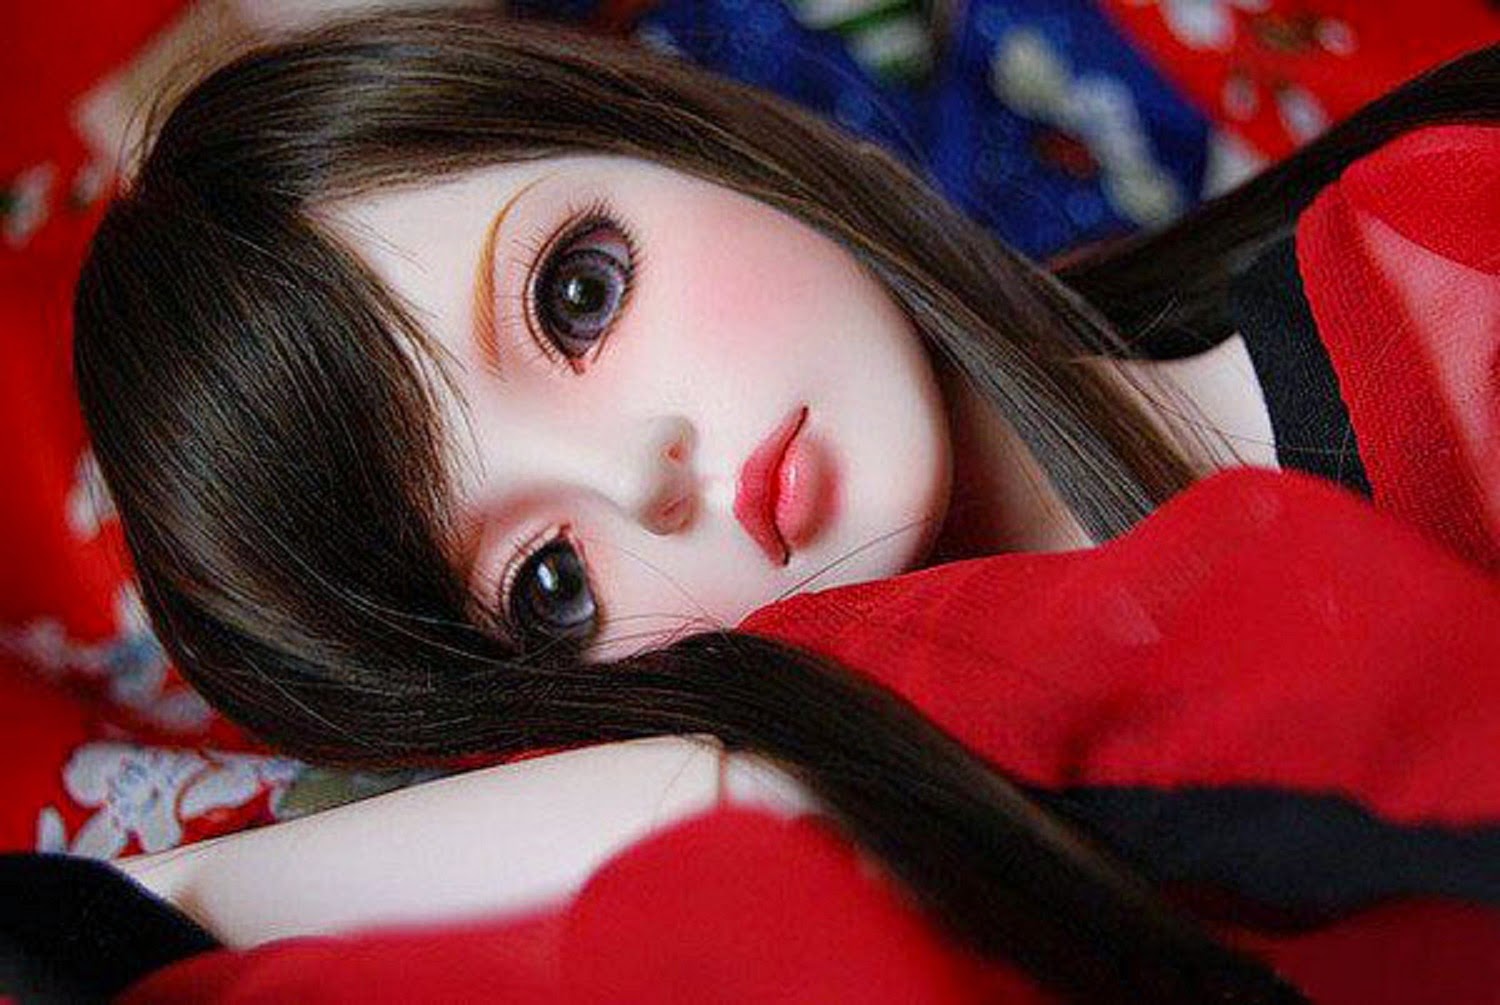 Cute Dolls Wallpapers For Facebook Profile Pictures